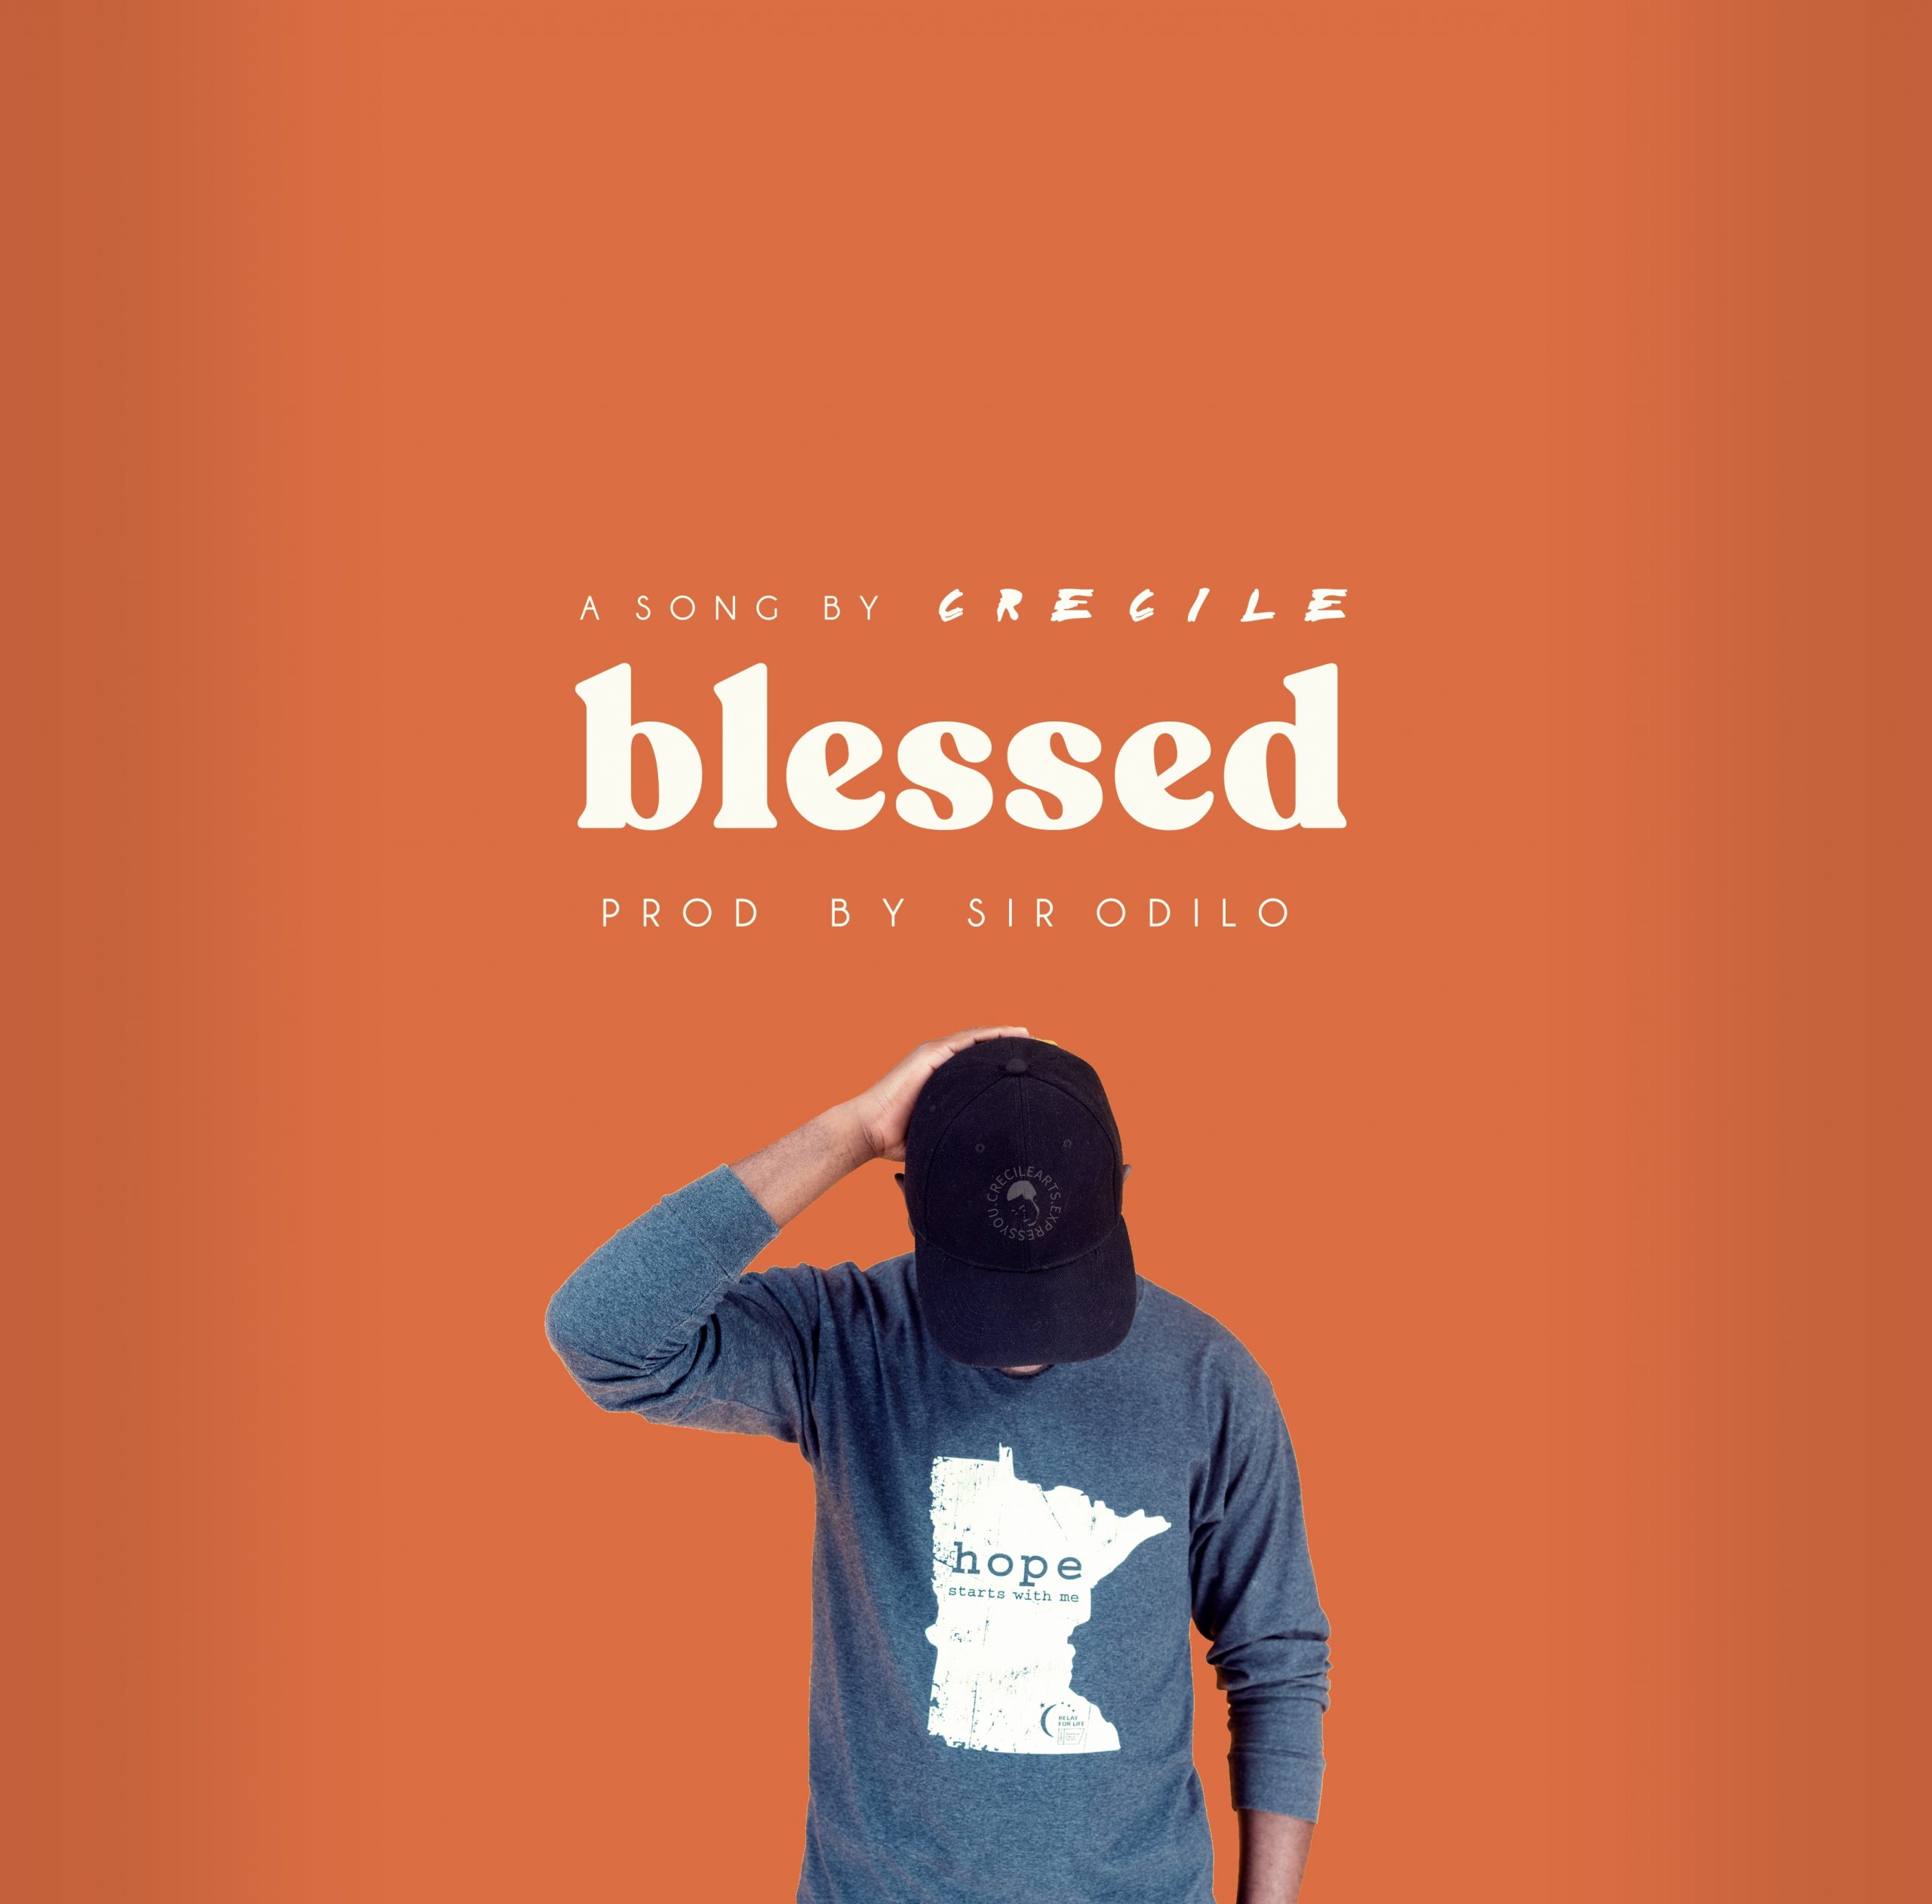  [Music Download]Crecile – Blessed